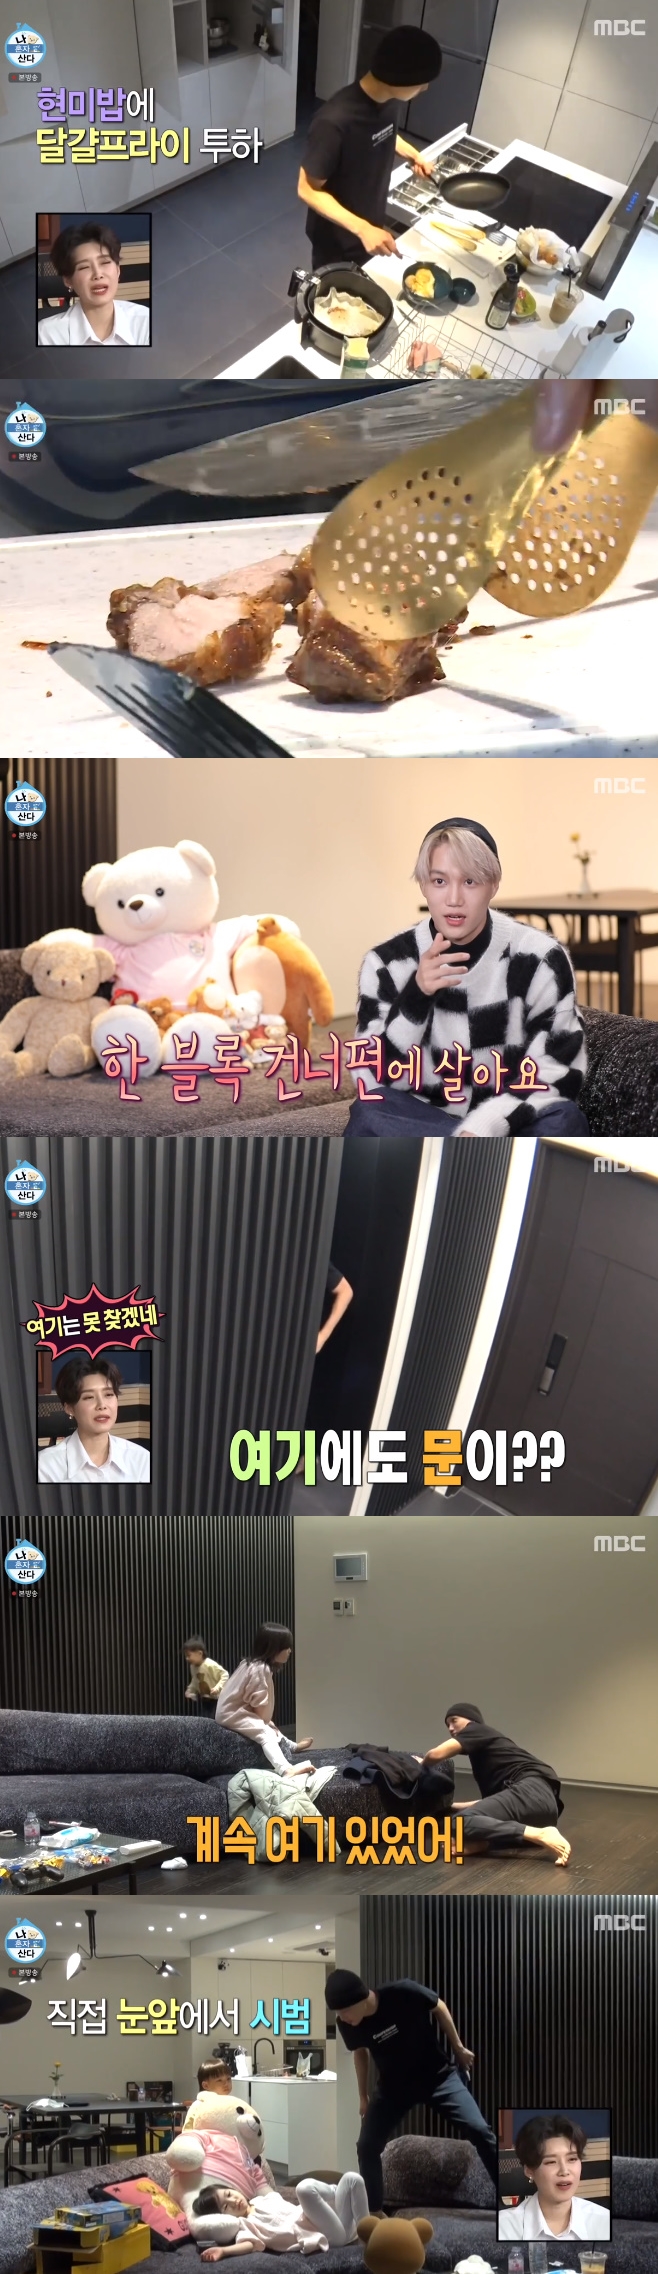 In I Live Alone, EXO Kai has released all of his clean interiors, from his clean and honest daily life with his two nephews.MBC entertainment program I Live Alone broadcasted on the night of the 20th introduced the daily life of group EXO member Kai.On this day, Kai told her about her habits of managing clothes, from home interiors full of specialties.Kai said: The whole house was Interiors with a feeling that it was a fuse paper, adding a point or two to it.For example, the living room has a sofa, and the kitchen has a table and lighting. The unseen one was one of the special things. Kai said, The door was as untidy as the wall.So, like a secret space, all spaces are connected. He introduced the door painted in the same color as the wall.Kai then unveiled a two-room dress room, which she said: I really like clothes, I keep collecting without throwing them away; the big dress room keeps outerwear, tops and accessories.In the small dressing room, I keep my pants and my bag. There are two dress rooms. I have my pajamas in my room. I love clothes so much, I mean them and I love them, said Kai, because I have a habit of not taking tags because Ive been out of tags since I was 20.When you were a child, you actually care about each of these clothes.I thought I could sell it when I could not afford it because I had clothes that cost, and I always wanted to wear clothes like new clothes.Were taking the inconvenience, he said.After that, Kai set himself up and questioned him to the park.Im actually busy, so I dont have many days to wear clothes to buy, so I have to wear them even if its not a big deal, Kai explained to MCs who asked, Did you go to the park dressed like that?Kai, who had finished the walk, also demonstrated his cooking skills hidden for his nephews who would find him.He finished the steak by shouting the barbarian and soon made soy sauce egg rice to supplement carbohydrates.Shortly after, Kais two nephews arrived at his home, where Kai said: The first sisters son and daughter, the first seven and the second five.All my family members live a block away. I like to take care of my child, and I decided to take care of it for about two hours today.Kai then went on Hide and Seek after finishing a warlike meal with her two children, among whom Kai said: I like Hide and Seek.I like them, and I feel comfortable. If you hide really well, you can rest for a long time. Thats why you remodeled the house. But, contrary to Kais expectations, Kai was found on the phone by her nephew, and then she hid herself in the dress room.Kai was embarrassed by the sofa, and he played the movie to buy time until his sister came, or showed off his dancing skills, but his nephew said, Its not cool.